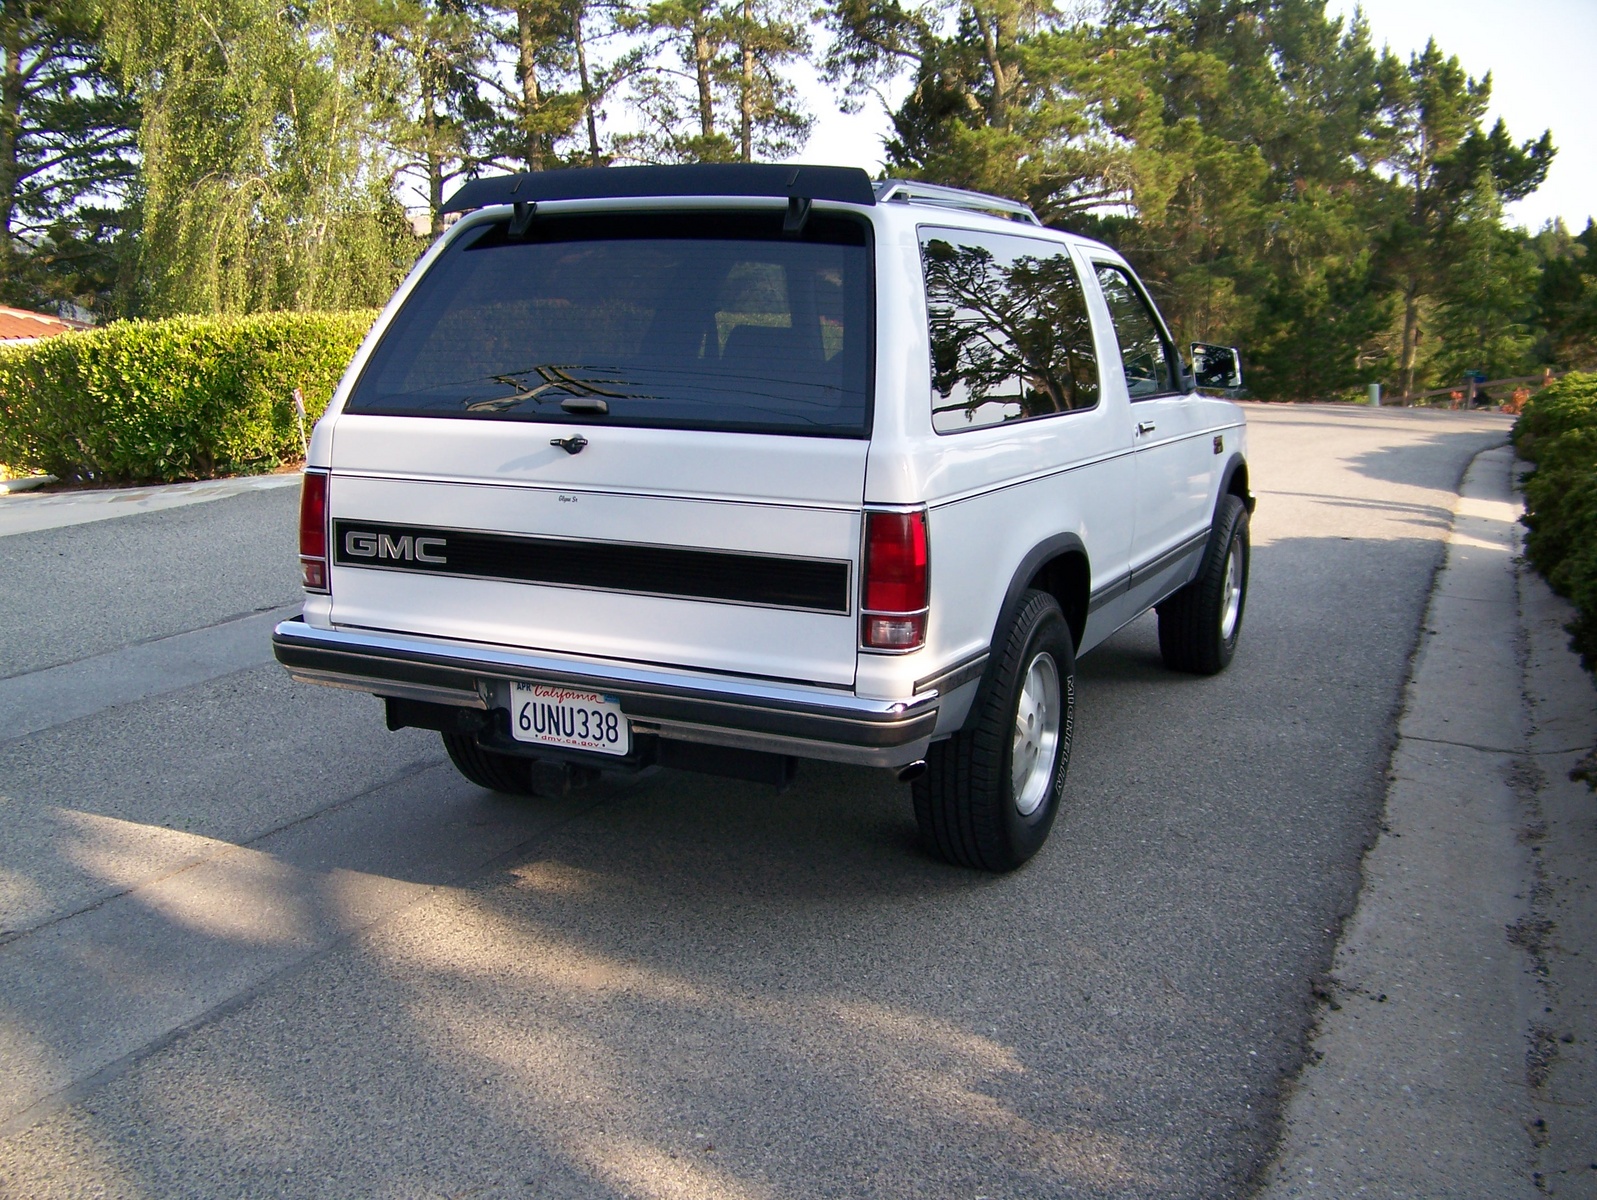 1996 Gmc jimmy specifications